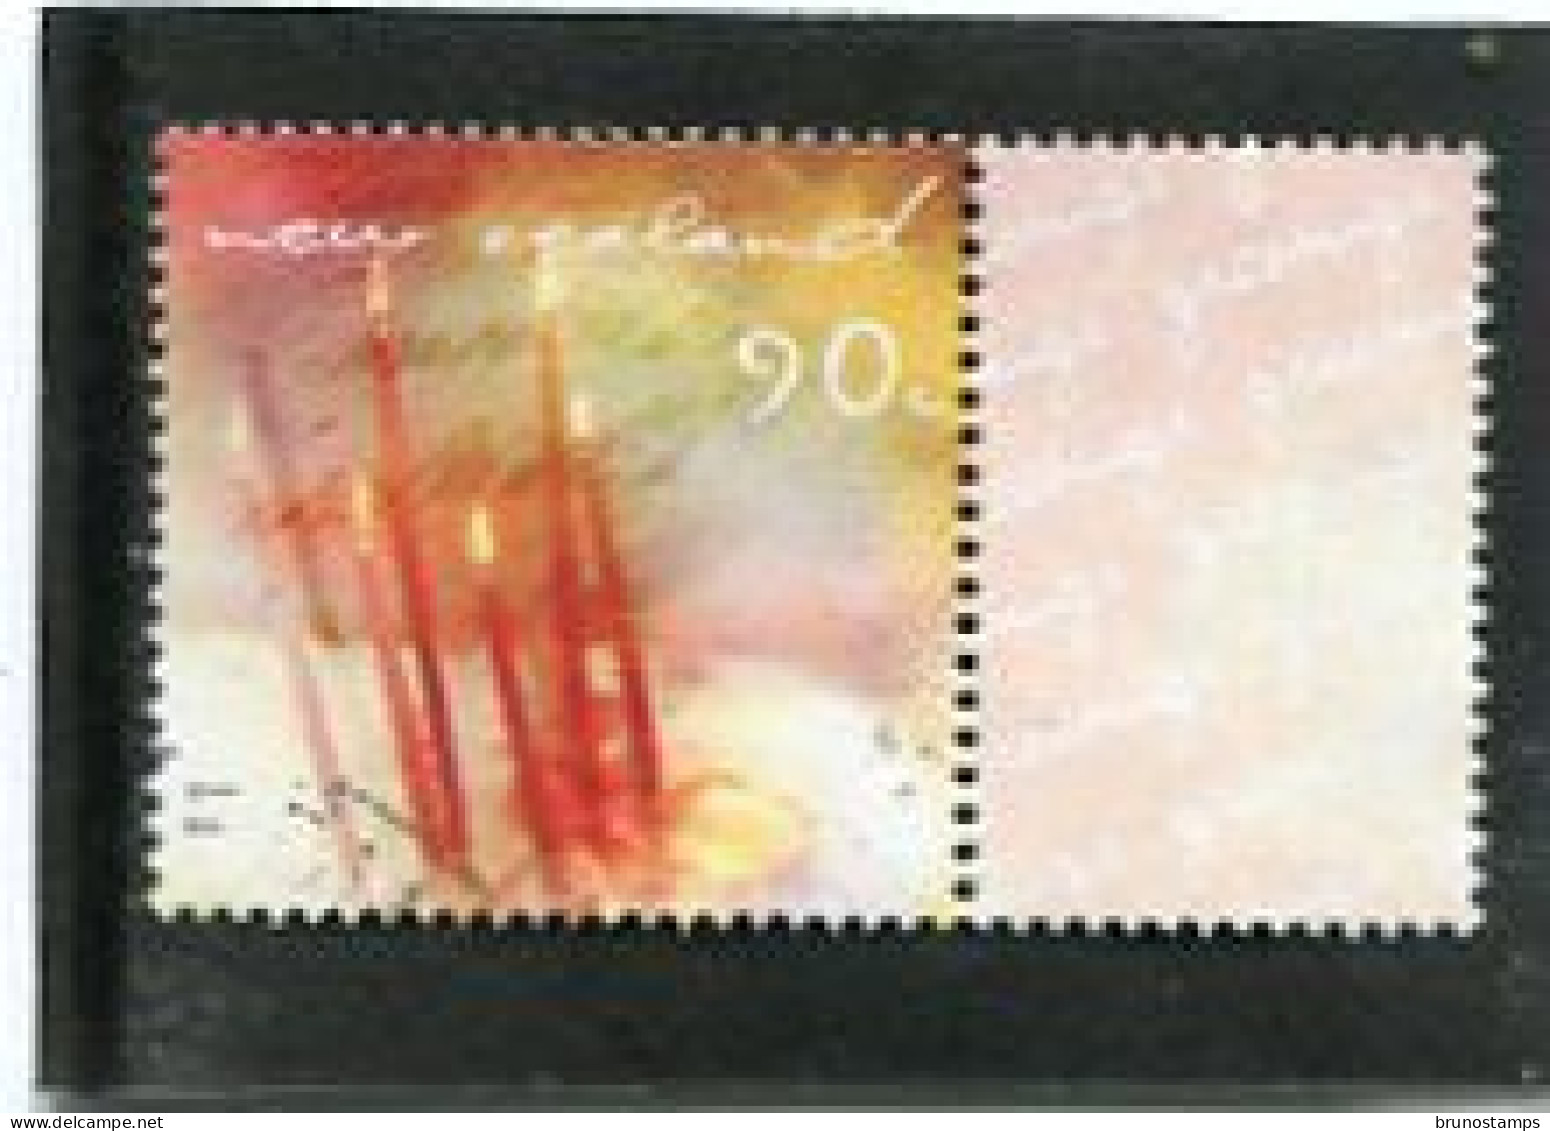 NEW ZEALAND - 2001  90c  GREETINGS  CANDLES  FINE  USED - Gebraucht